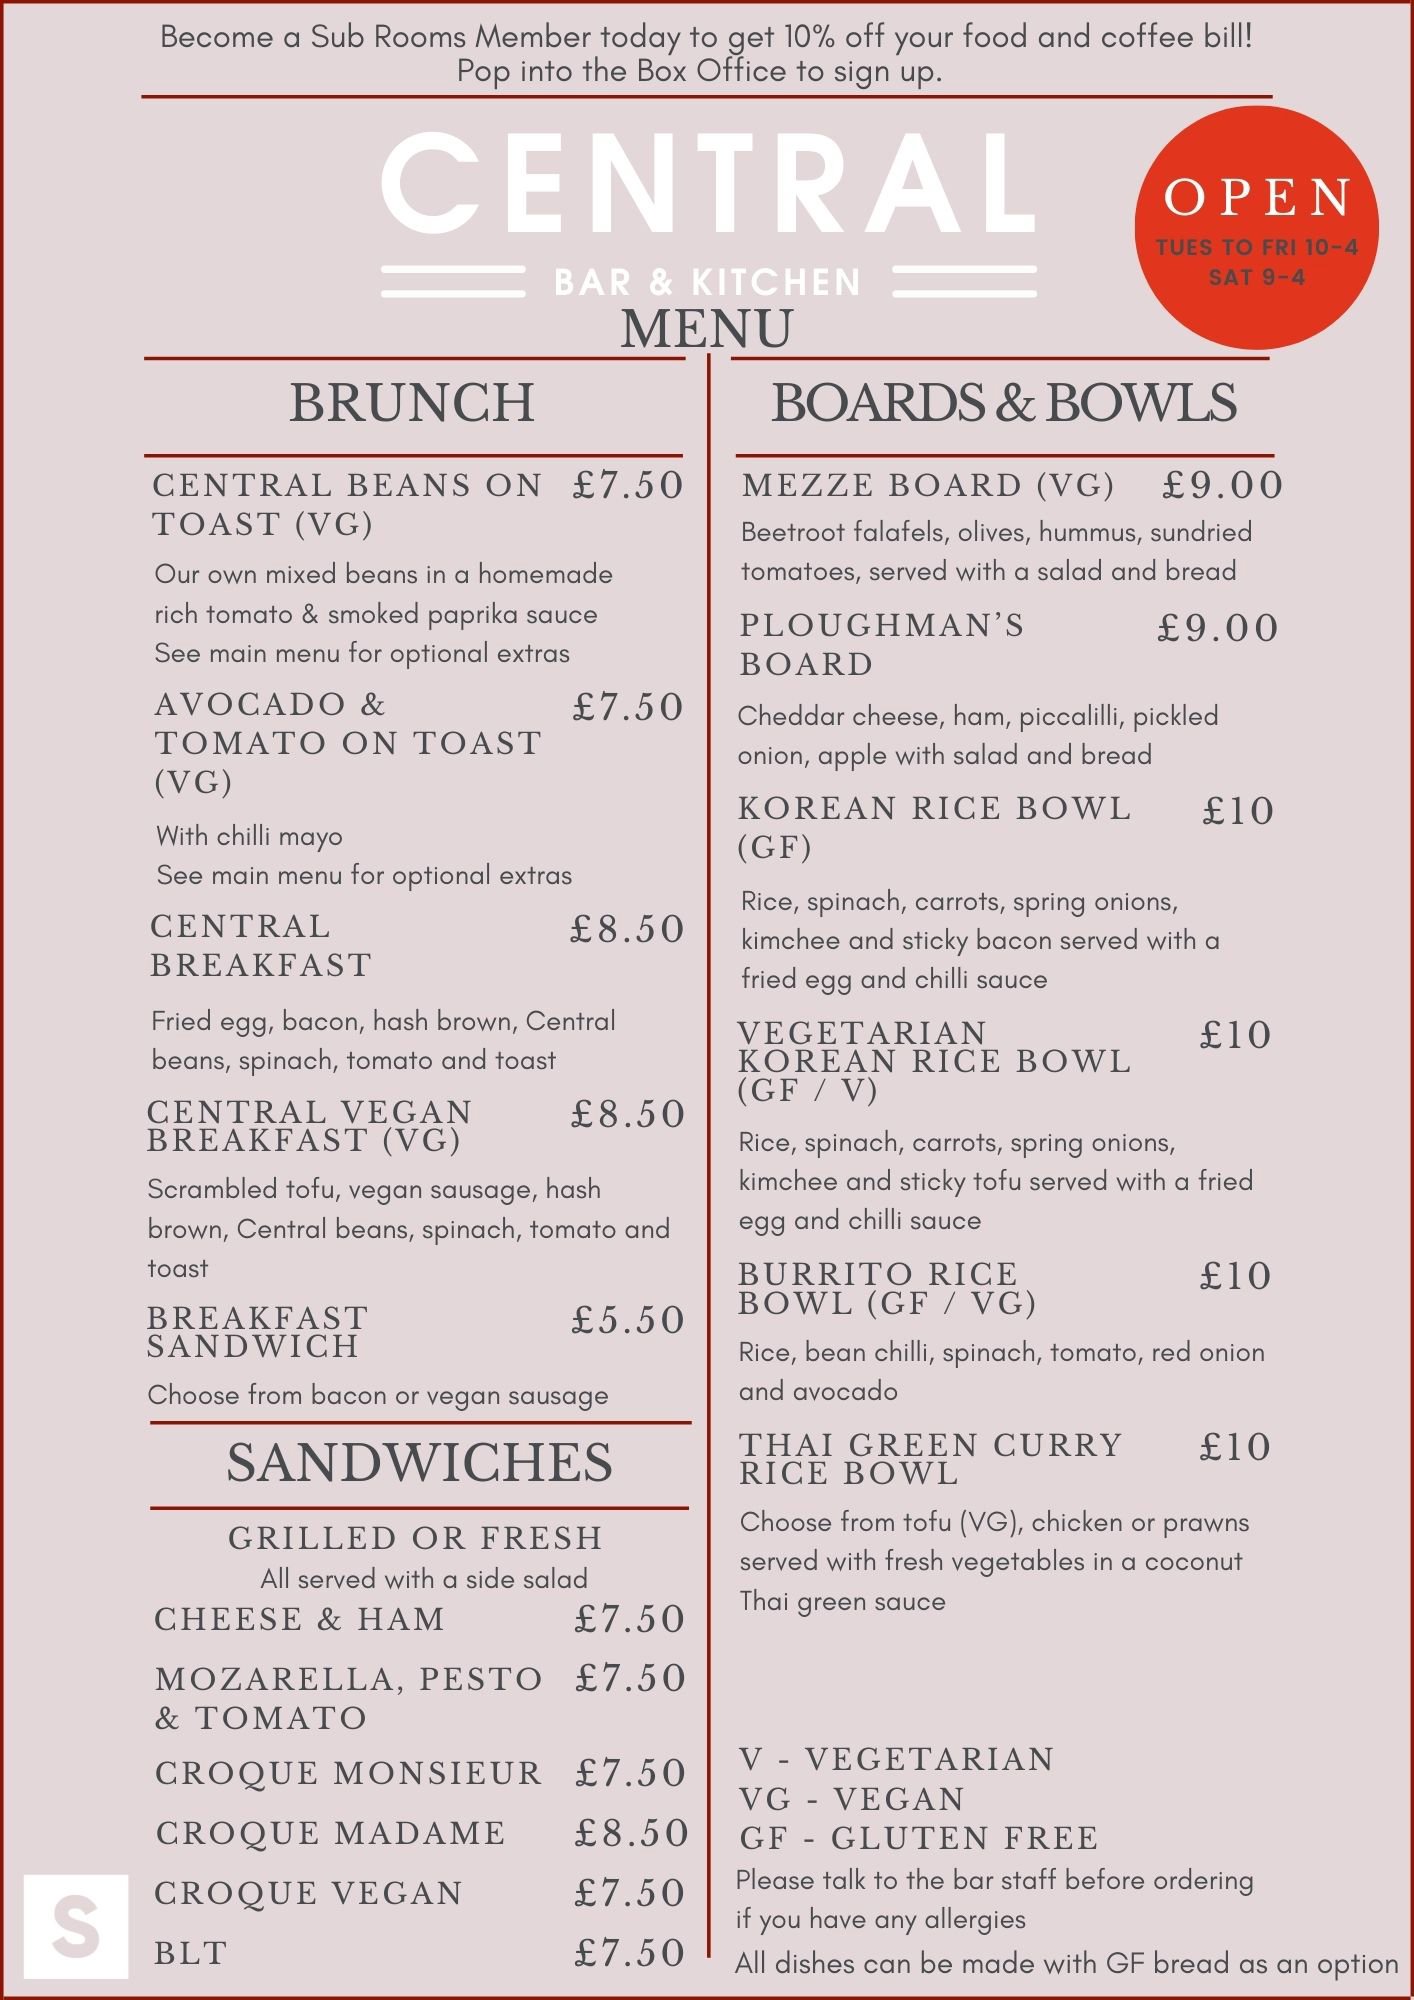 Cafe menu for The Sub Rooms Central Bar and Kitchen in Stroud